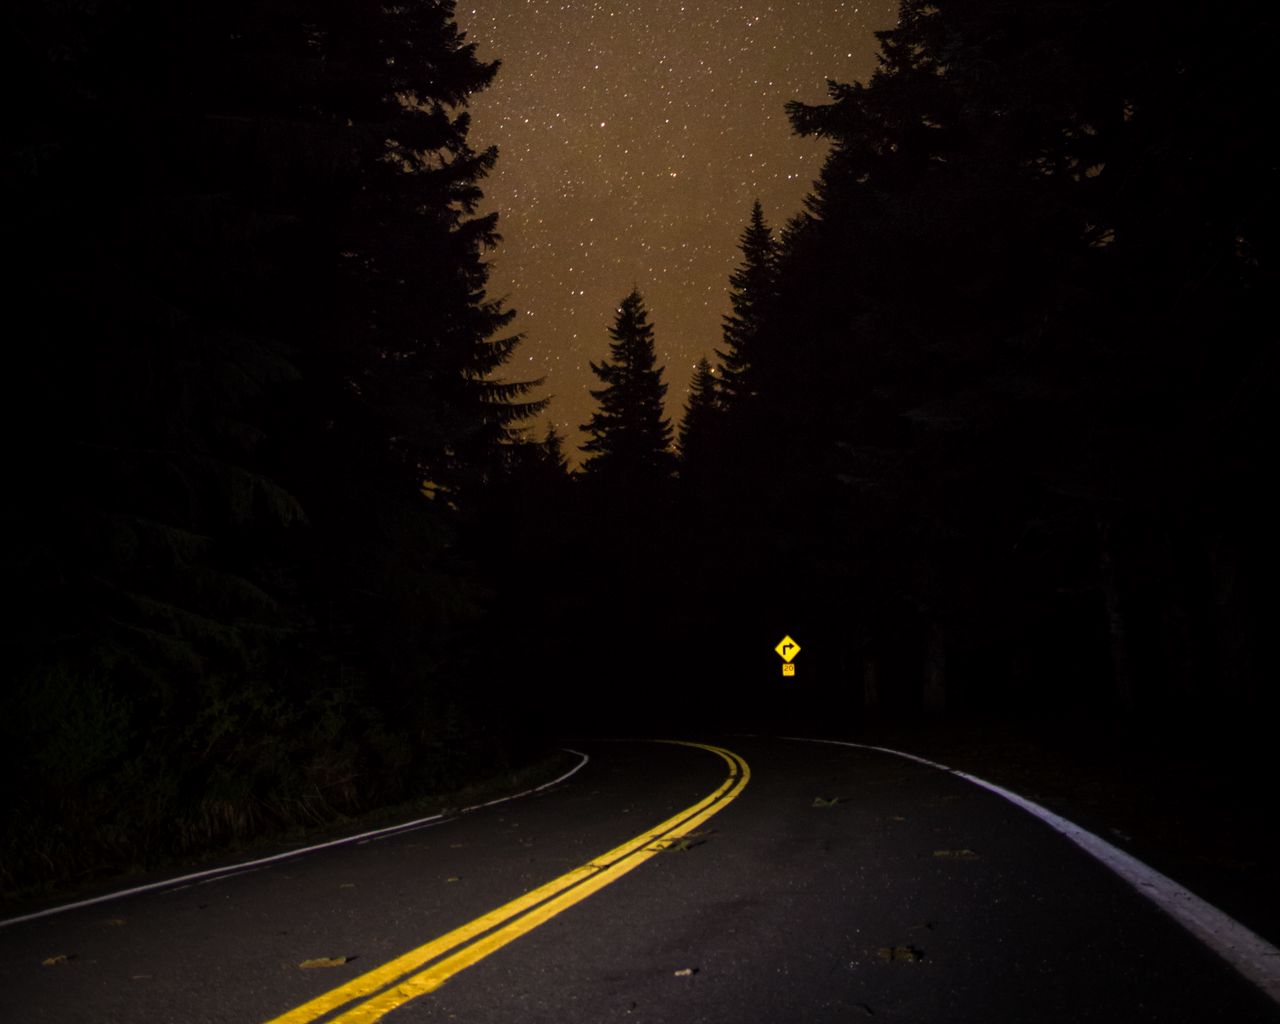 Download wallpaper 1280x1024 road, forest, night, starry sky standard 5:4 hd  background